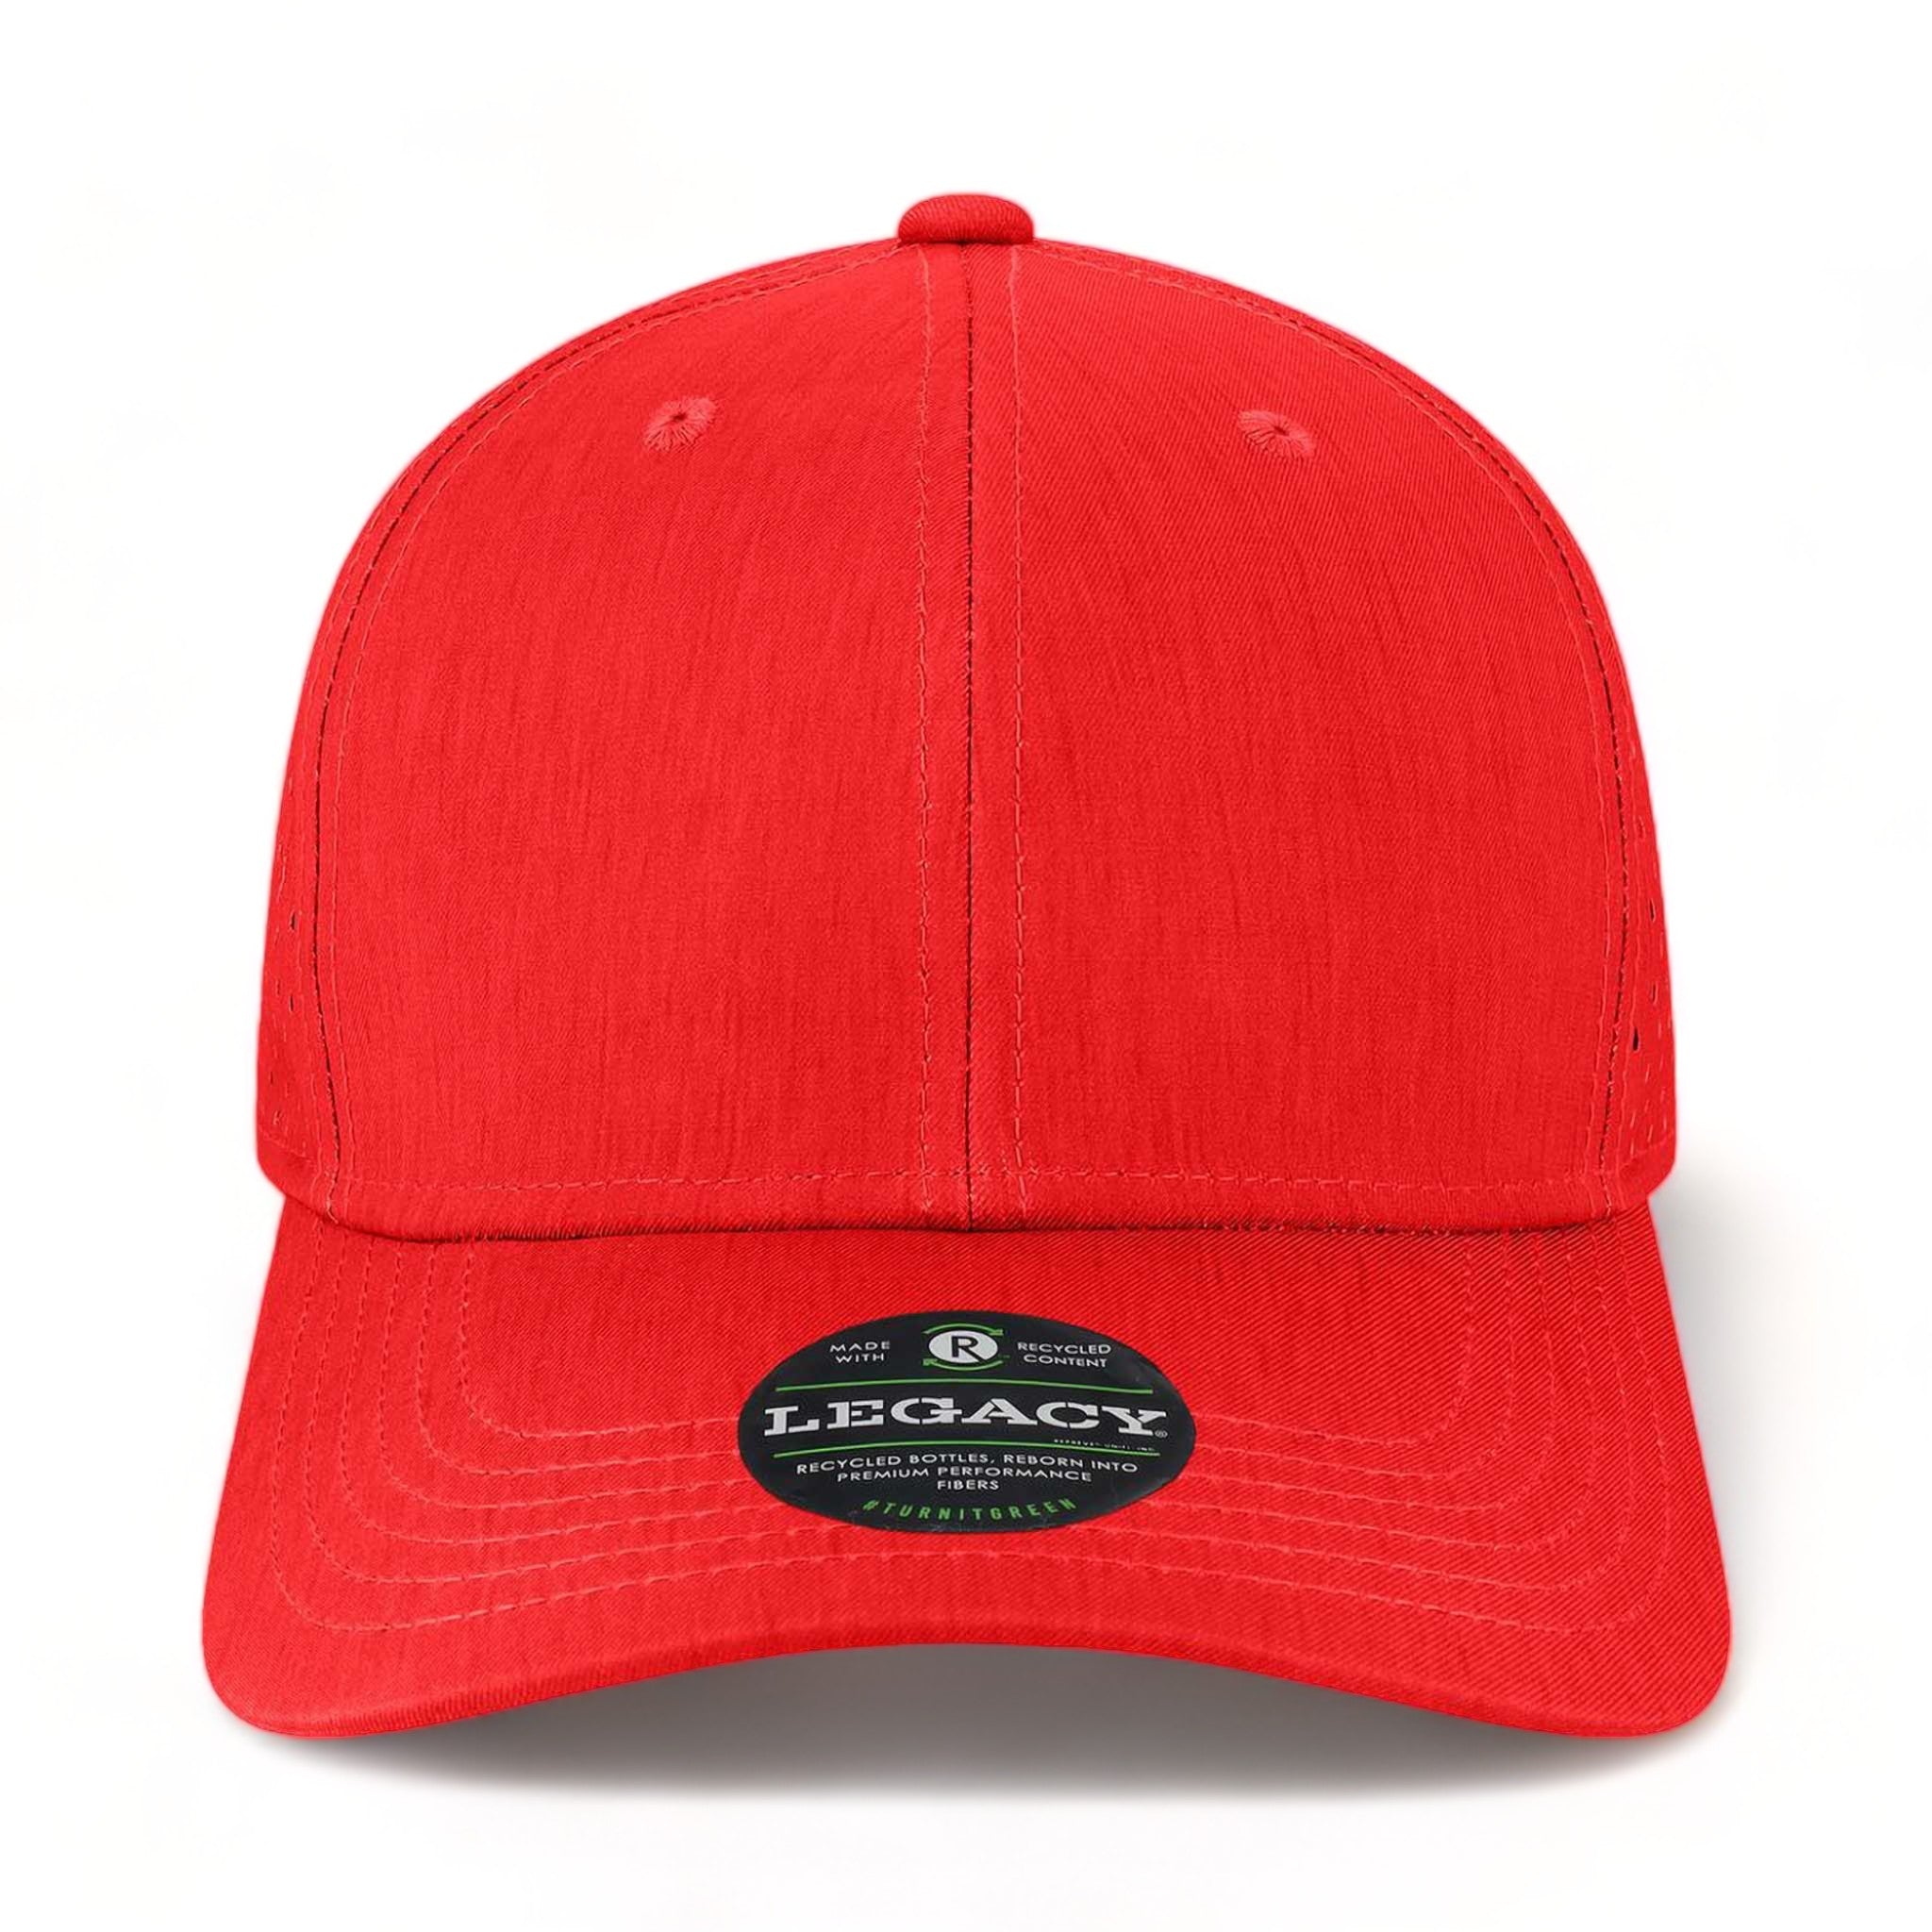 Front view of LEGACY REMPA custom hat in eco scarlet red